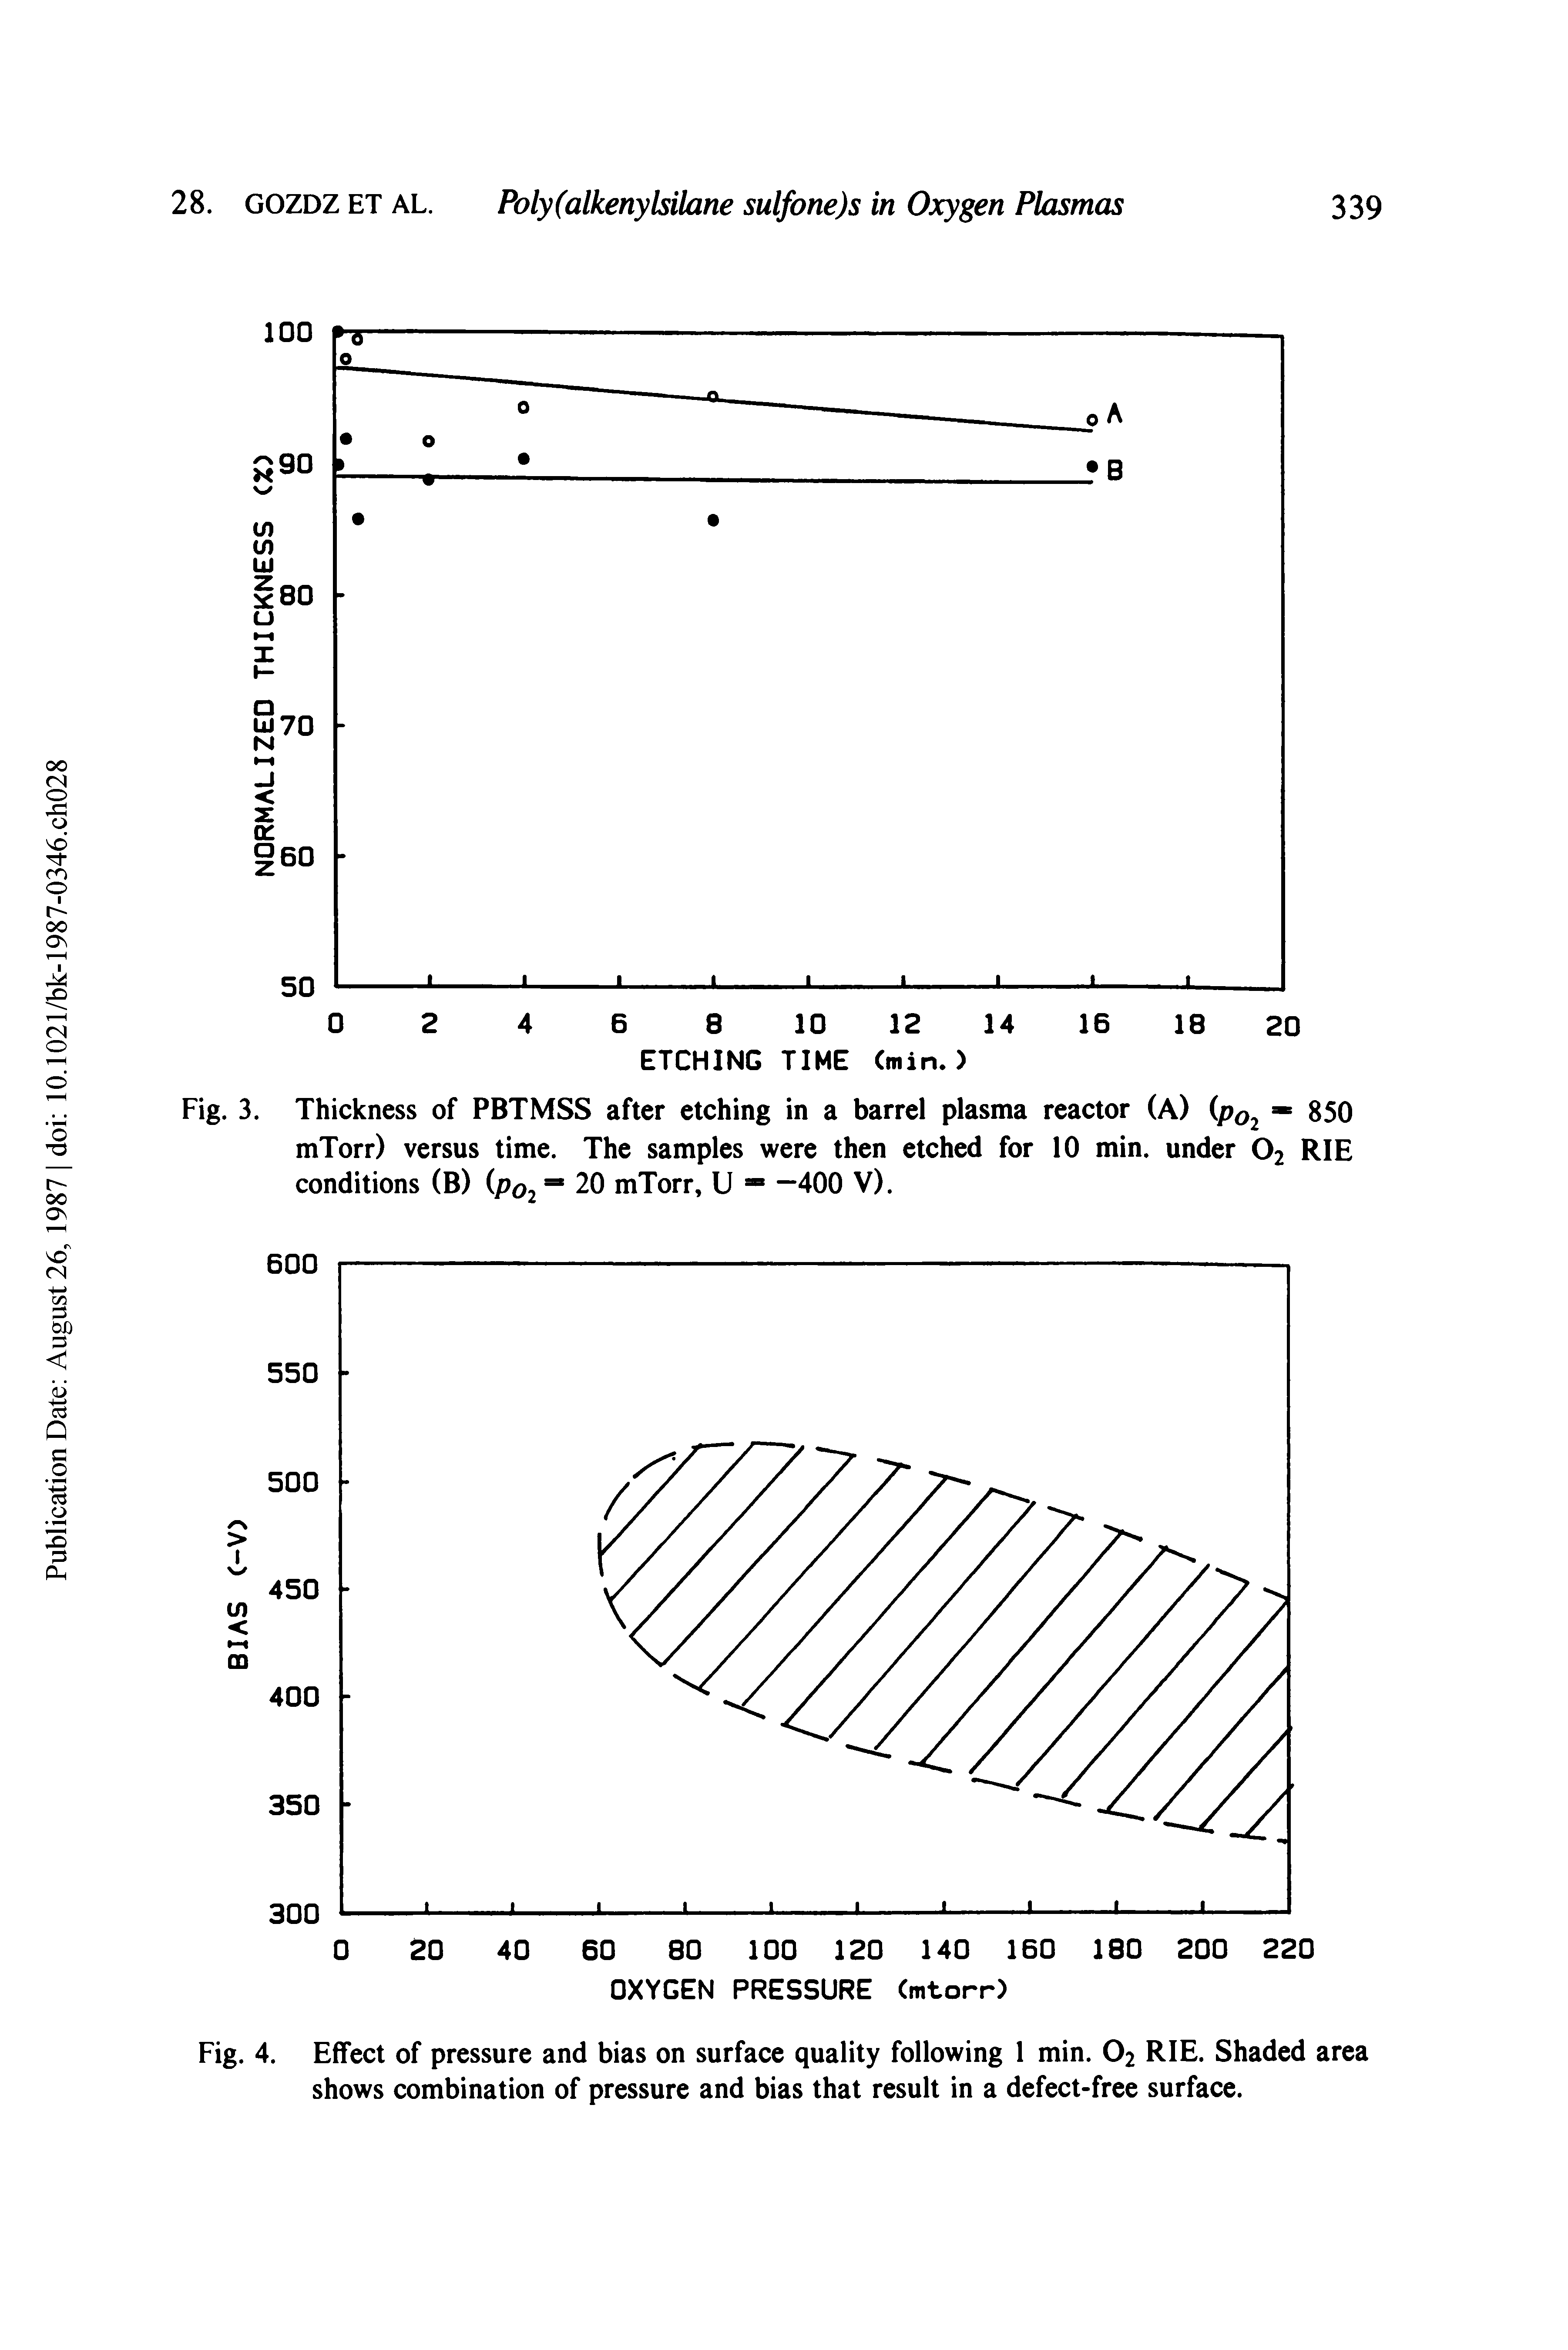 Fig. 4. Effect of pressure and bias on surface quality following 1 min. O2 RIE. Shaded area shows combination of pressure and bias that result in a defect-free surface.